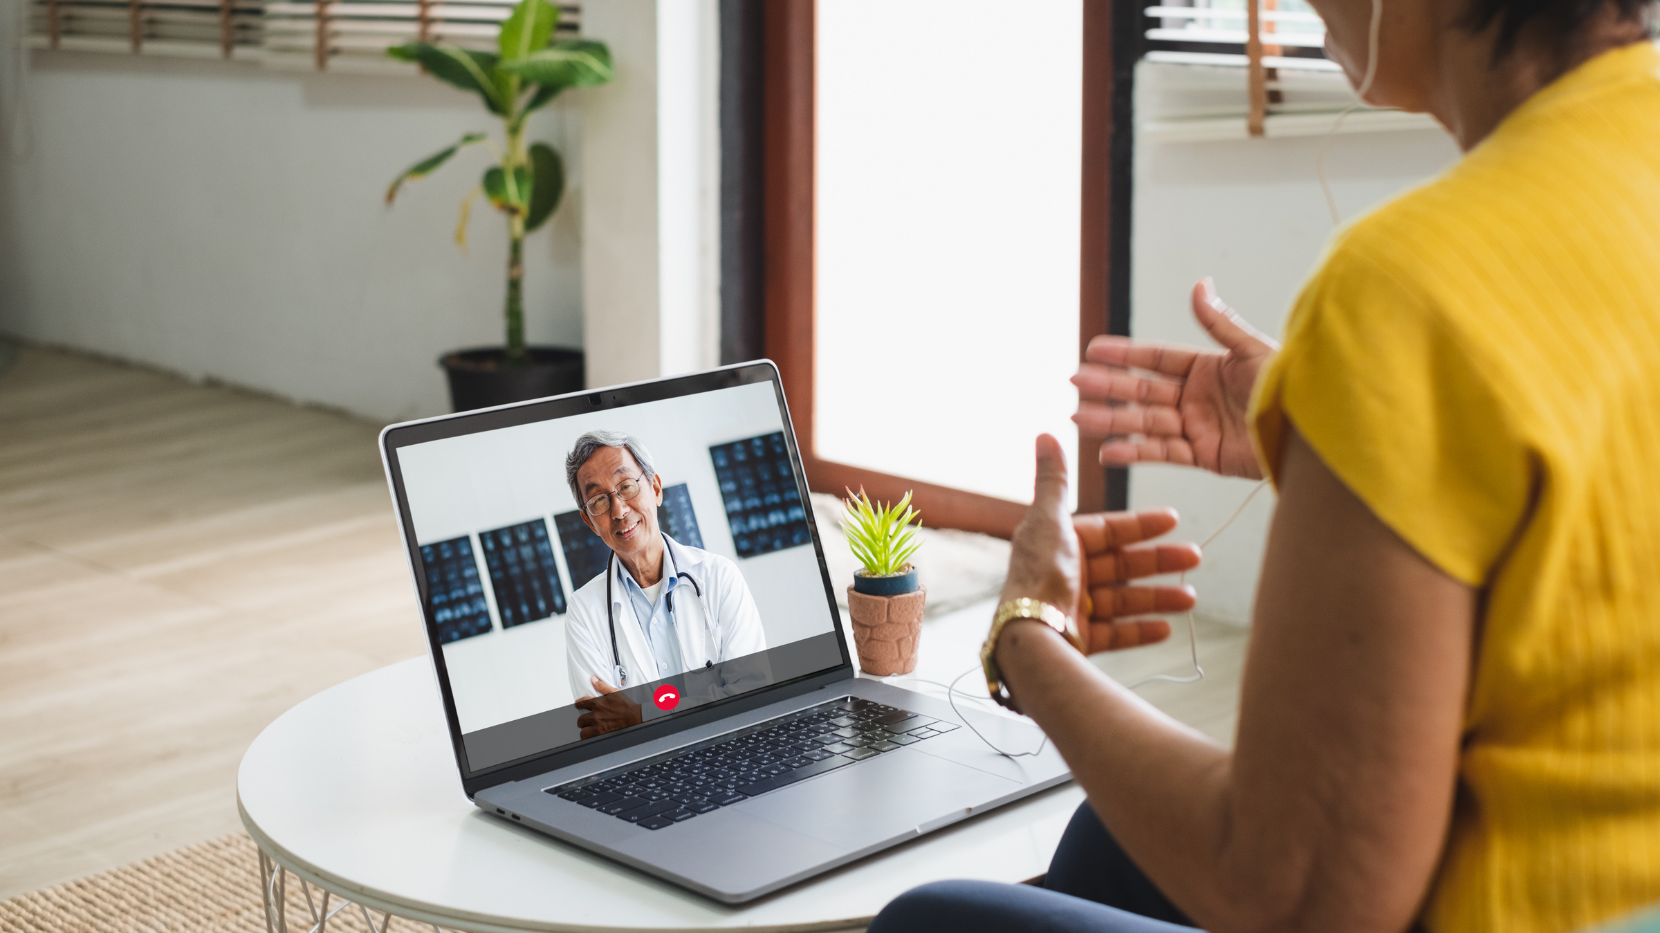 A patient speaking with their doctor on a telehealth call